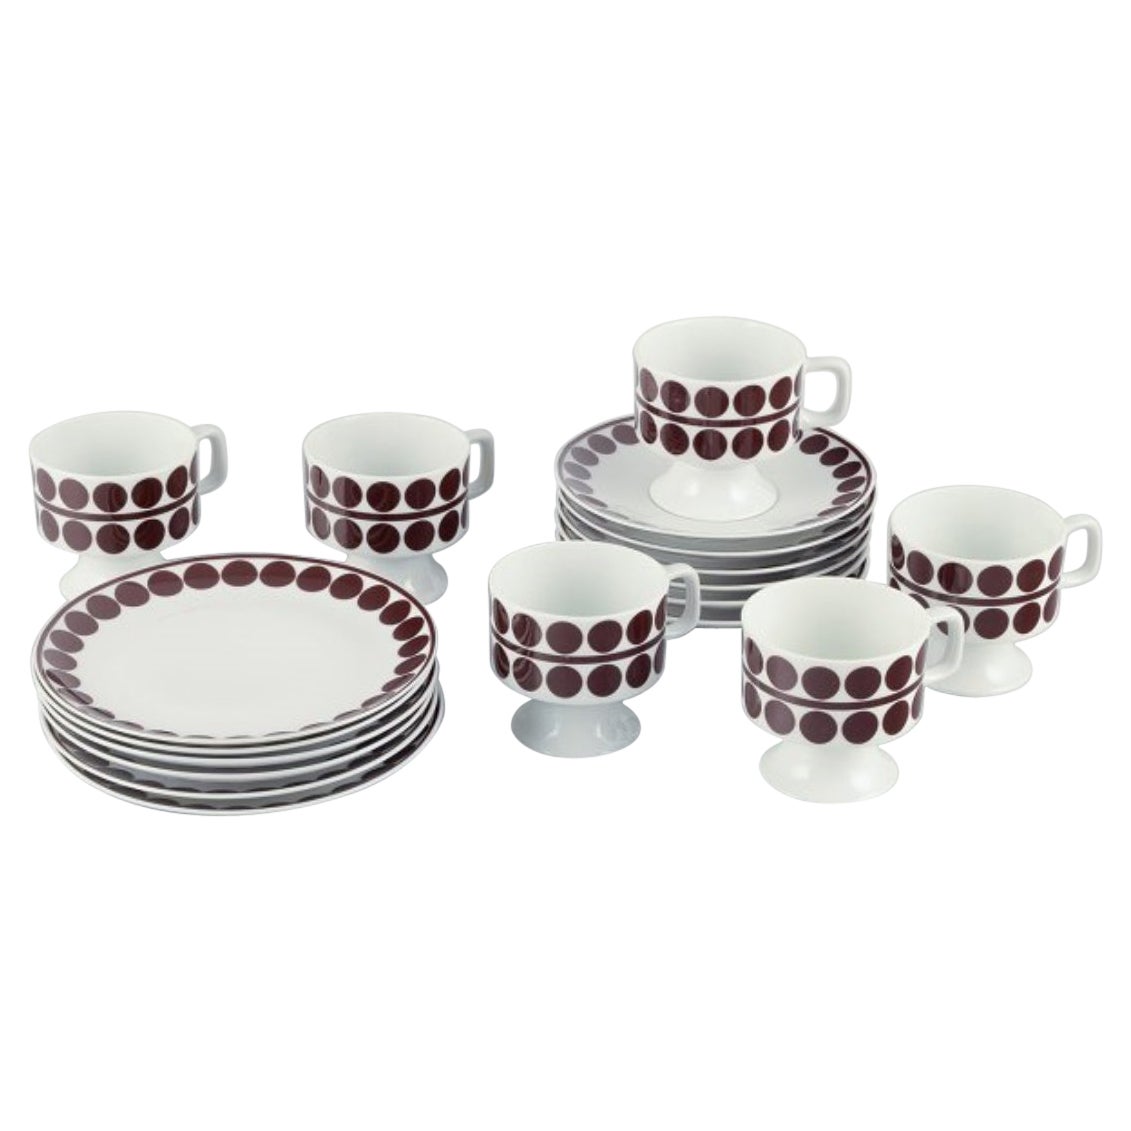 Eschenbach, Germany, a six-person retro coffee set in porcelain. For Sale